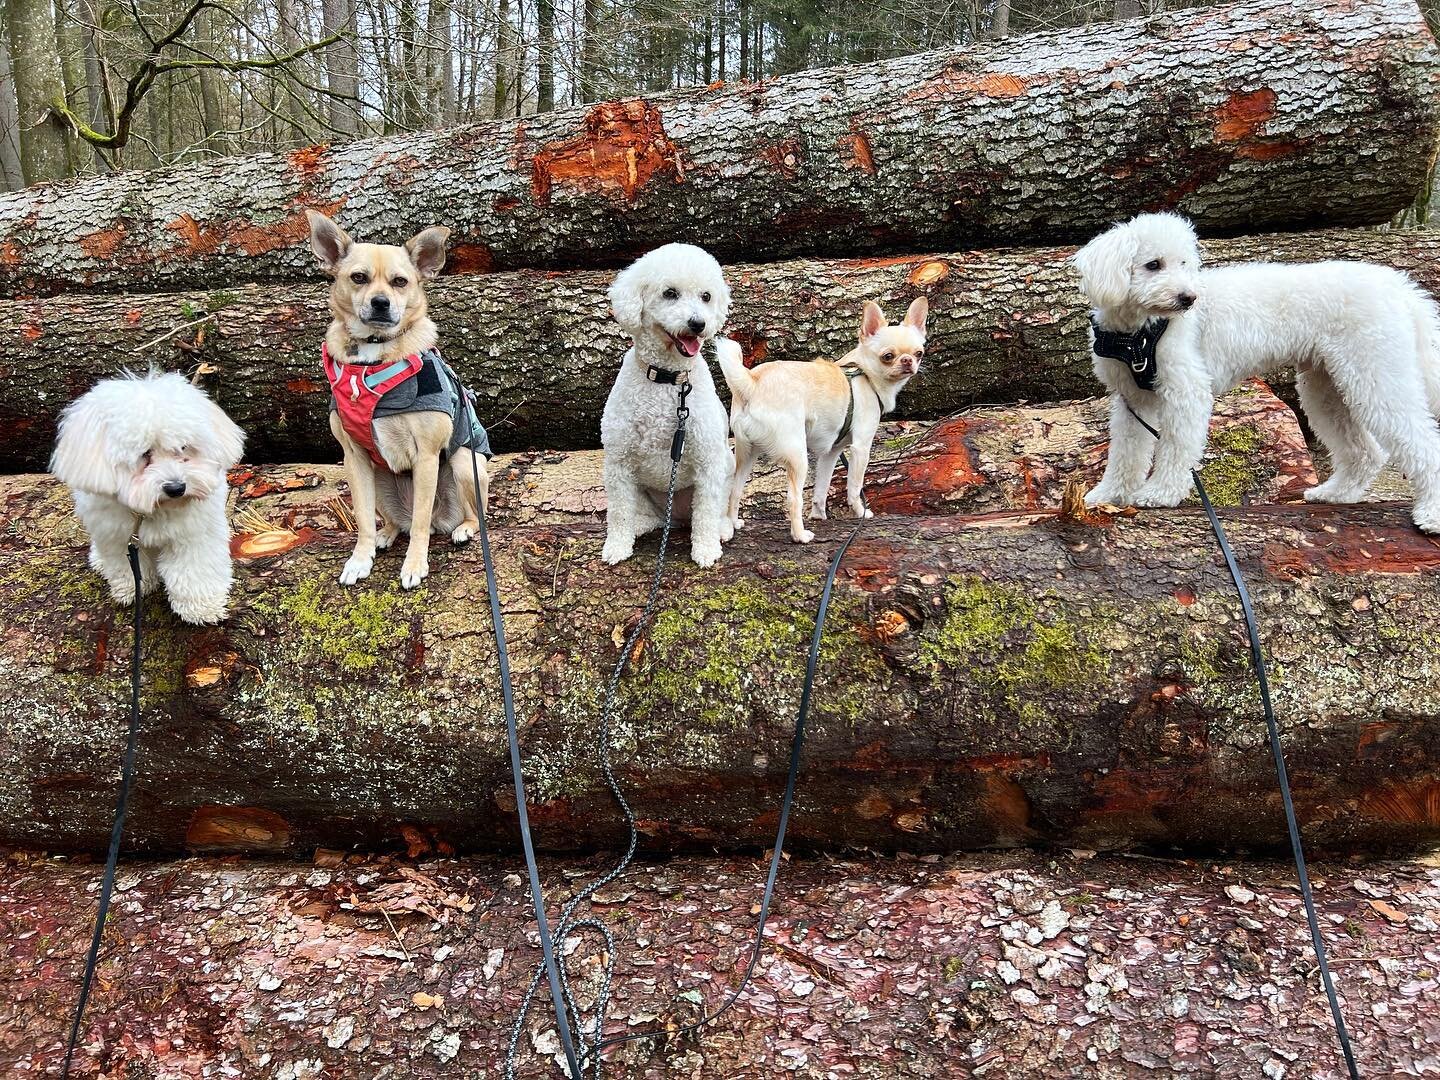 If the week starts with these super dogs, it has to be a great week❤️we wish you an amazing rest of the week🐾

#daycare #dogdaycare #adventures #friendship #pack #dogs #doglover #love #dogaffair #passion #happy #thankful #amazing #outdoor #walk #pos